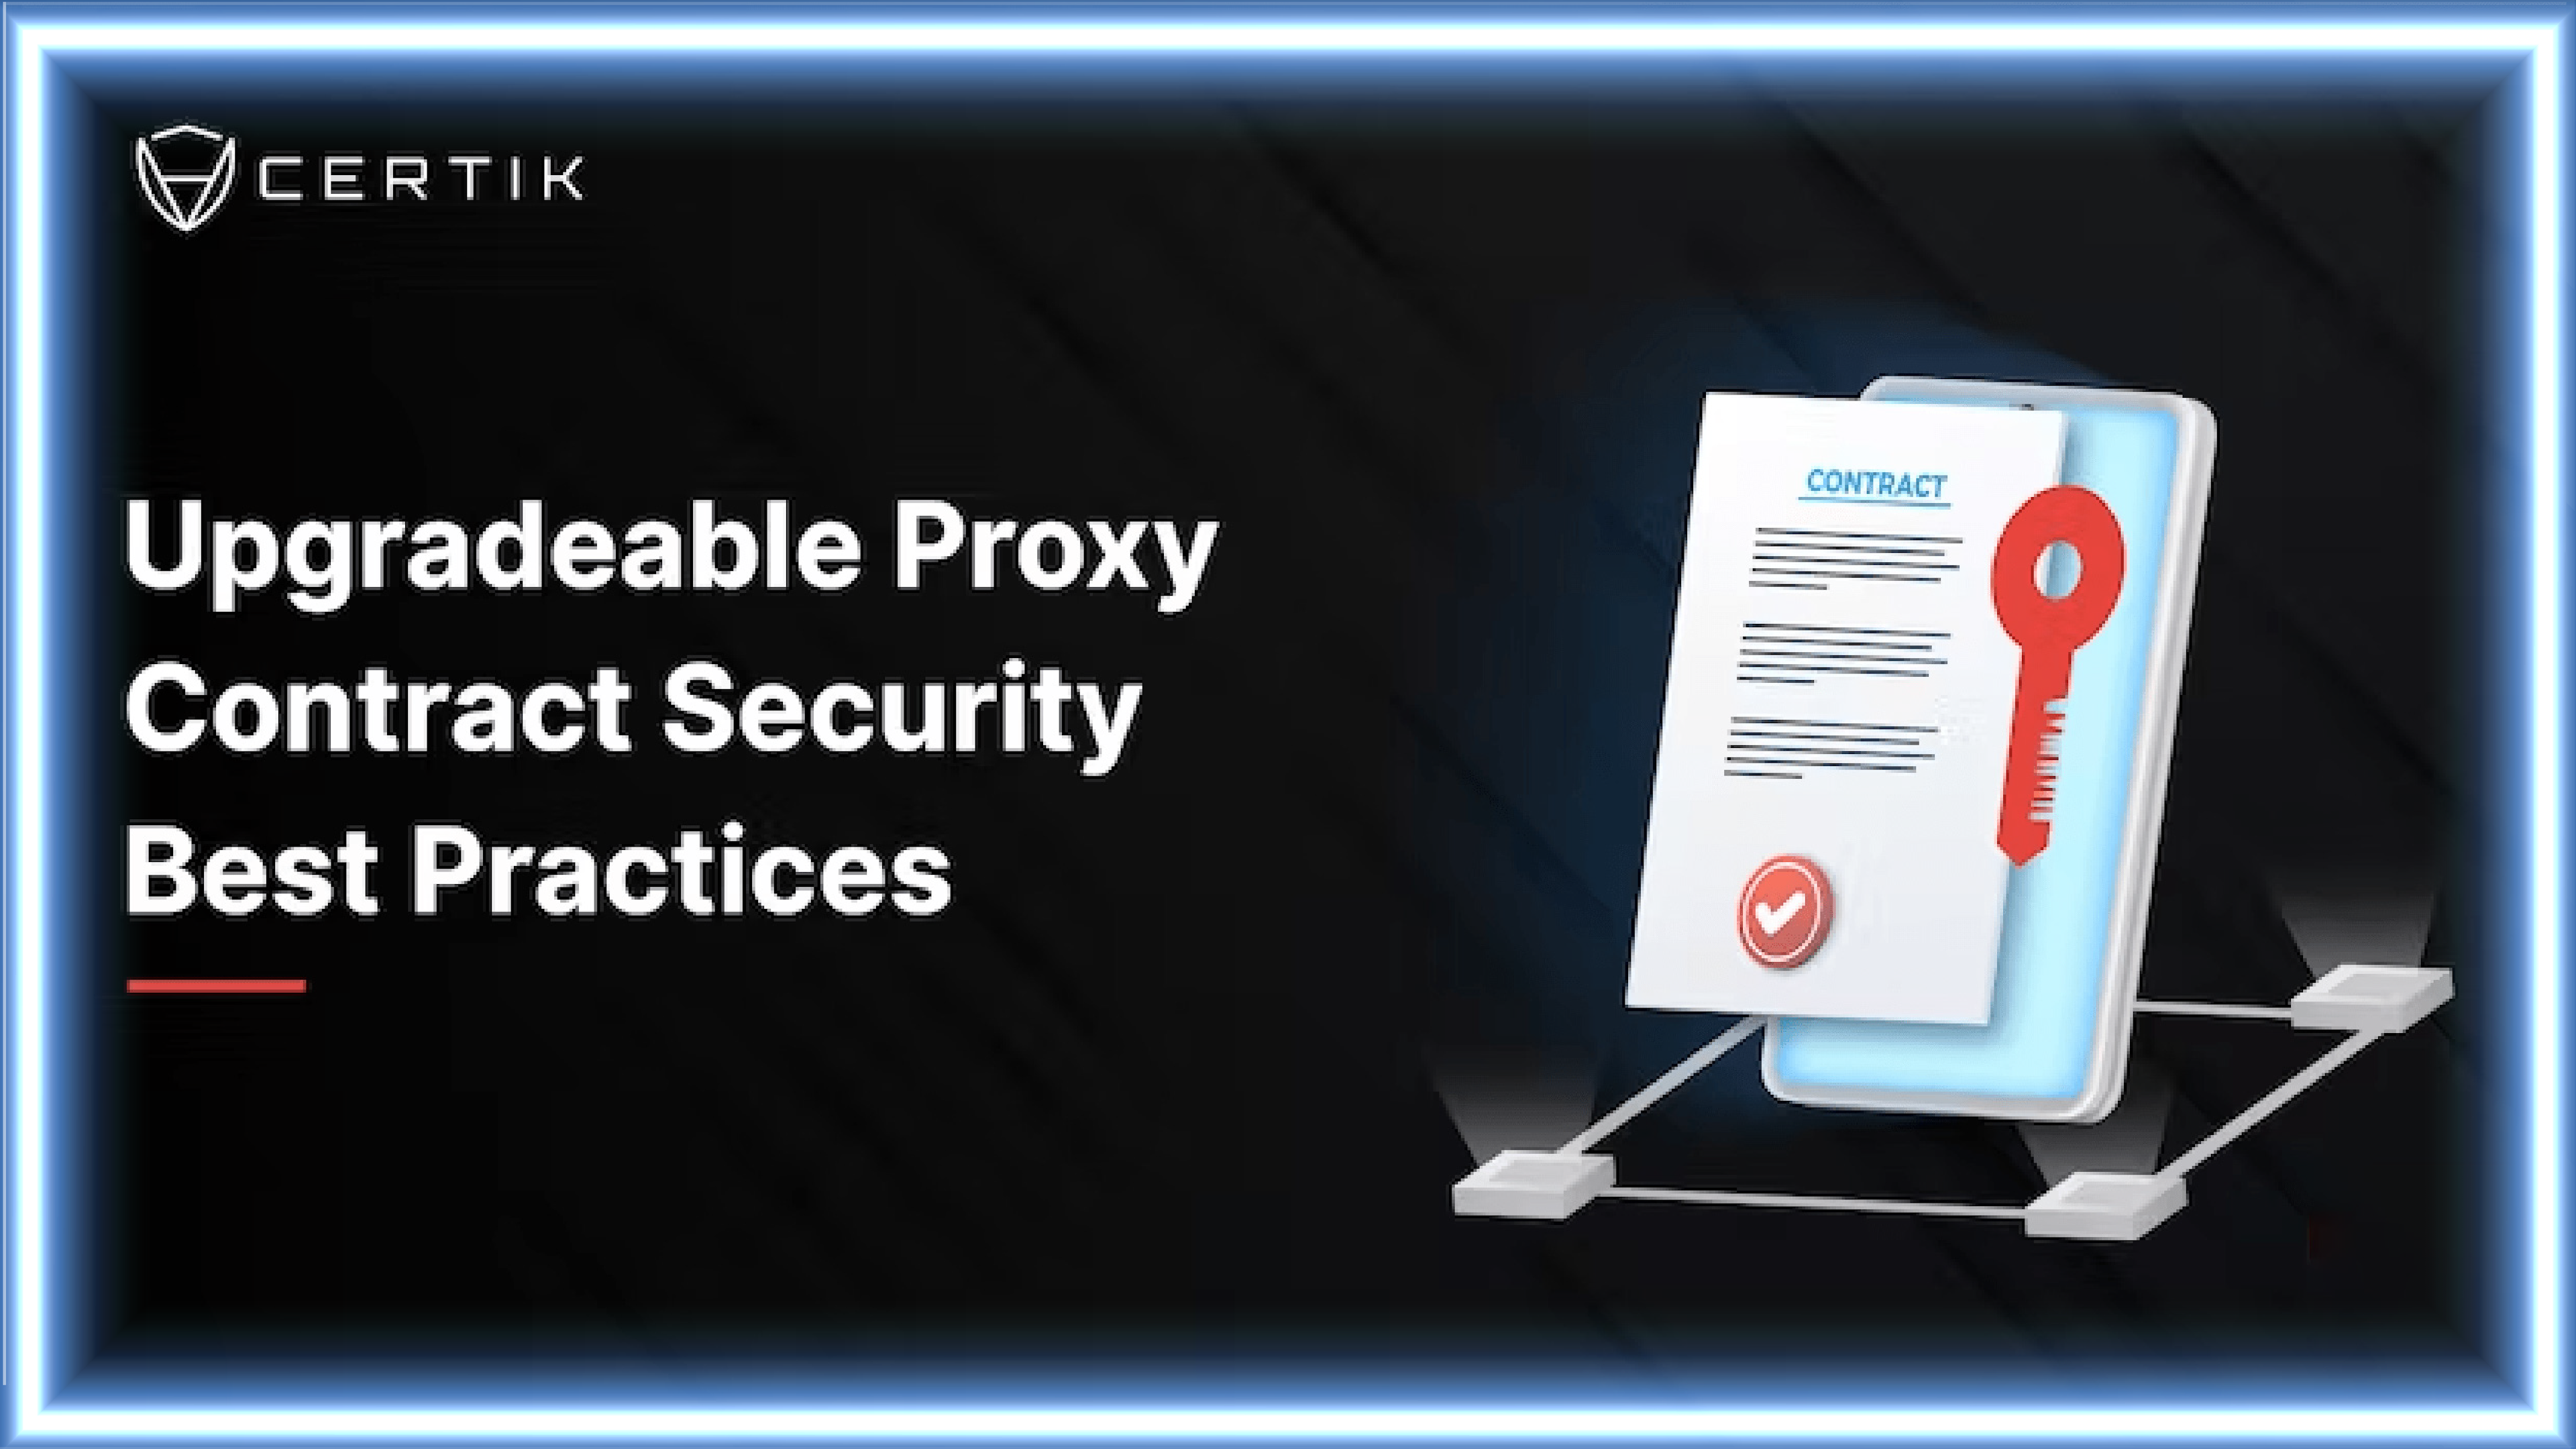 Upgradeable Proxy Contract Security Best Practices